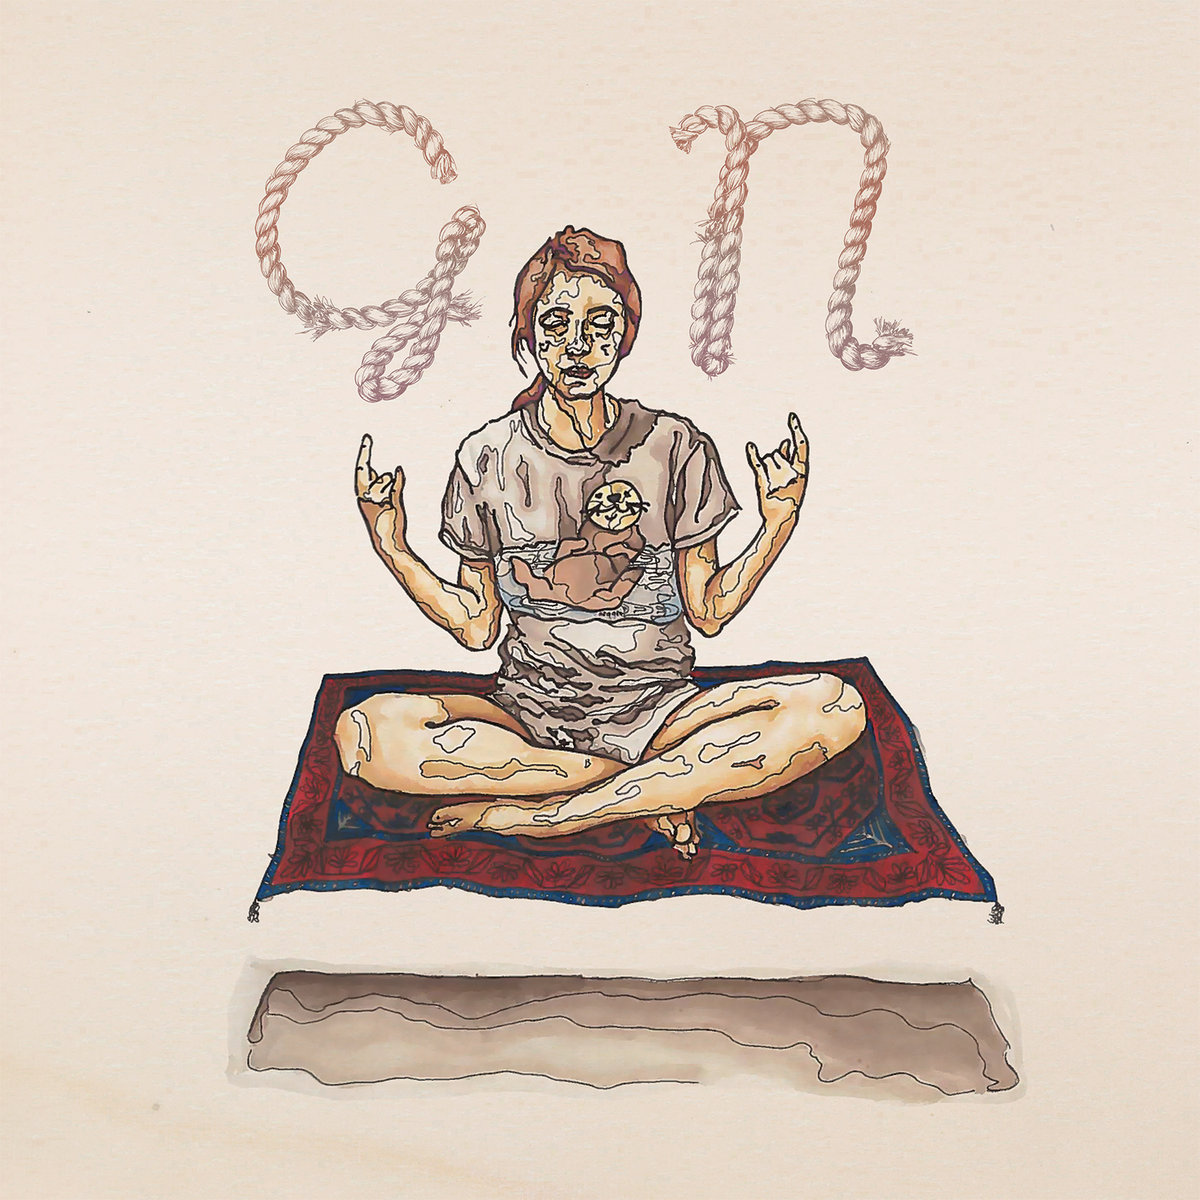 'GN" by Ratboys, album review by Adam Williams.